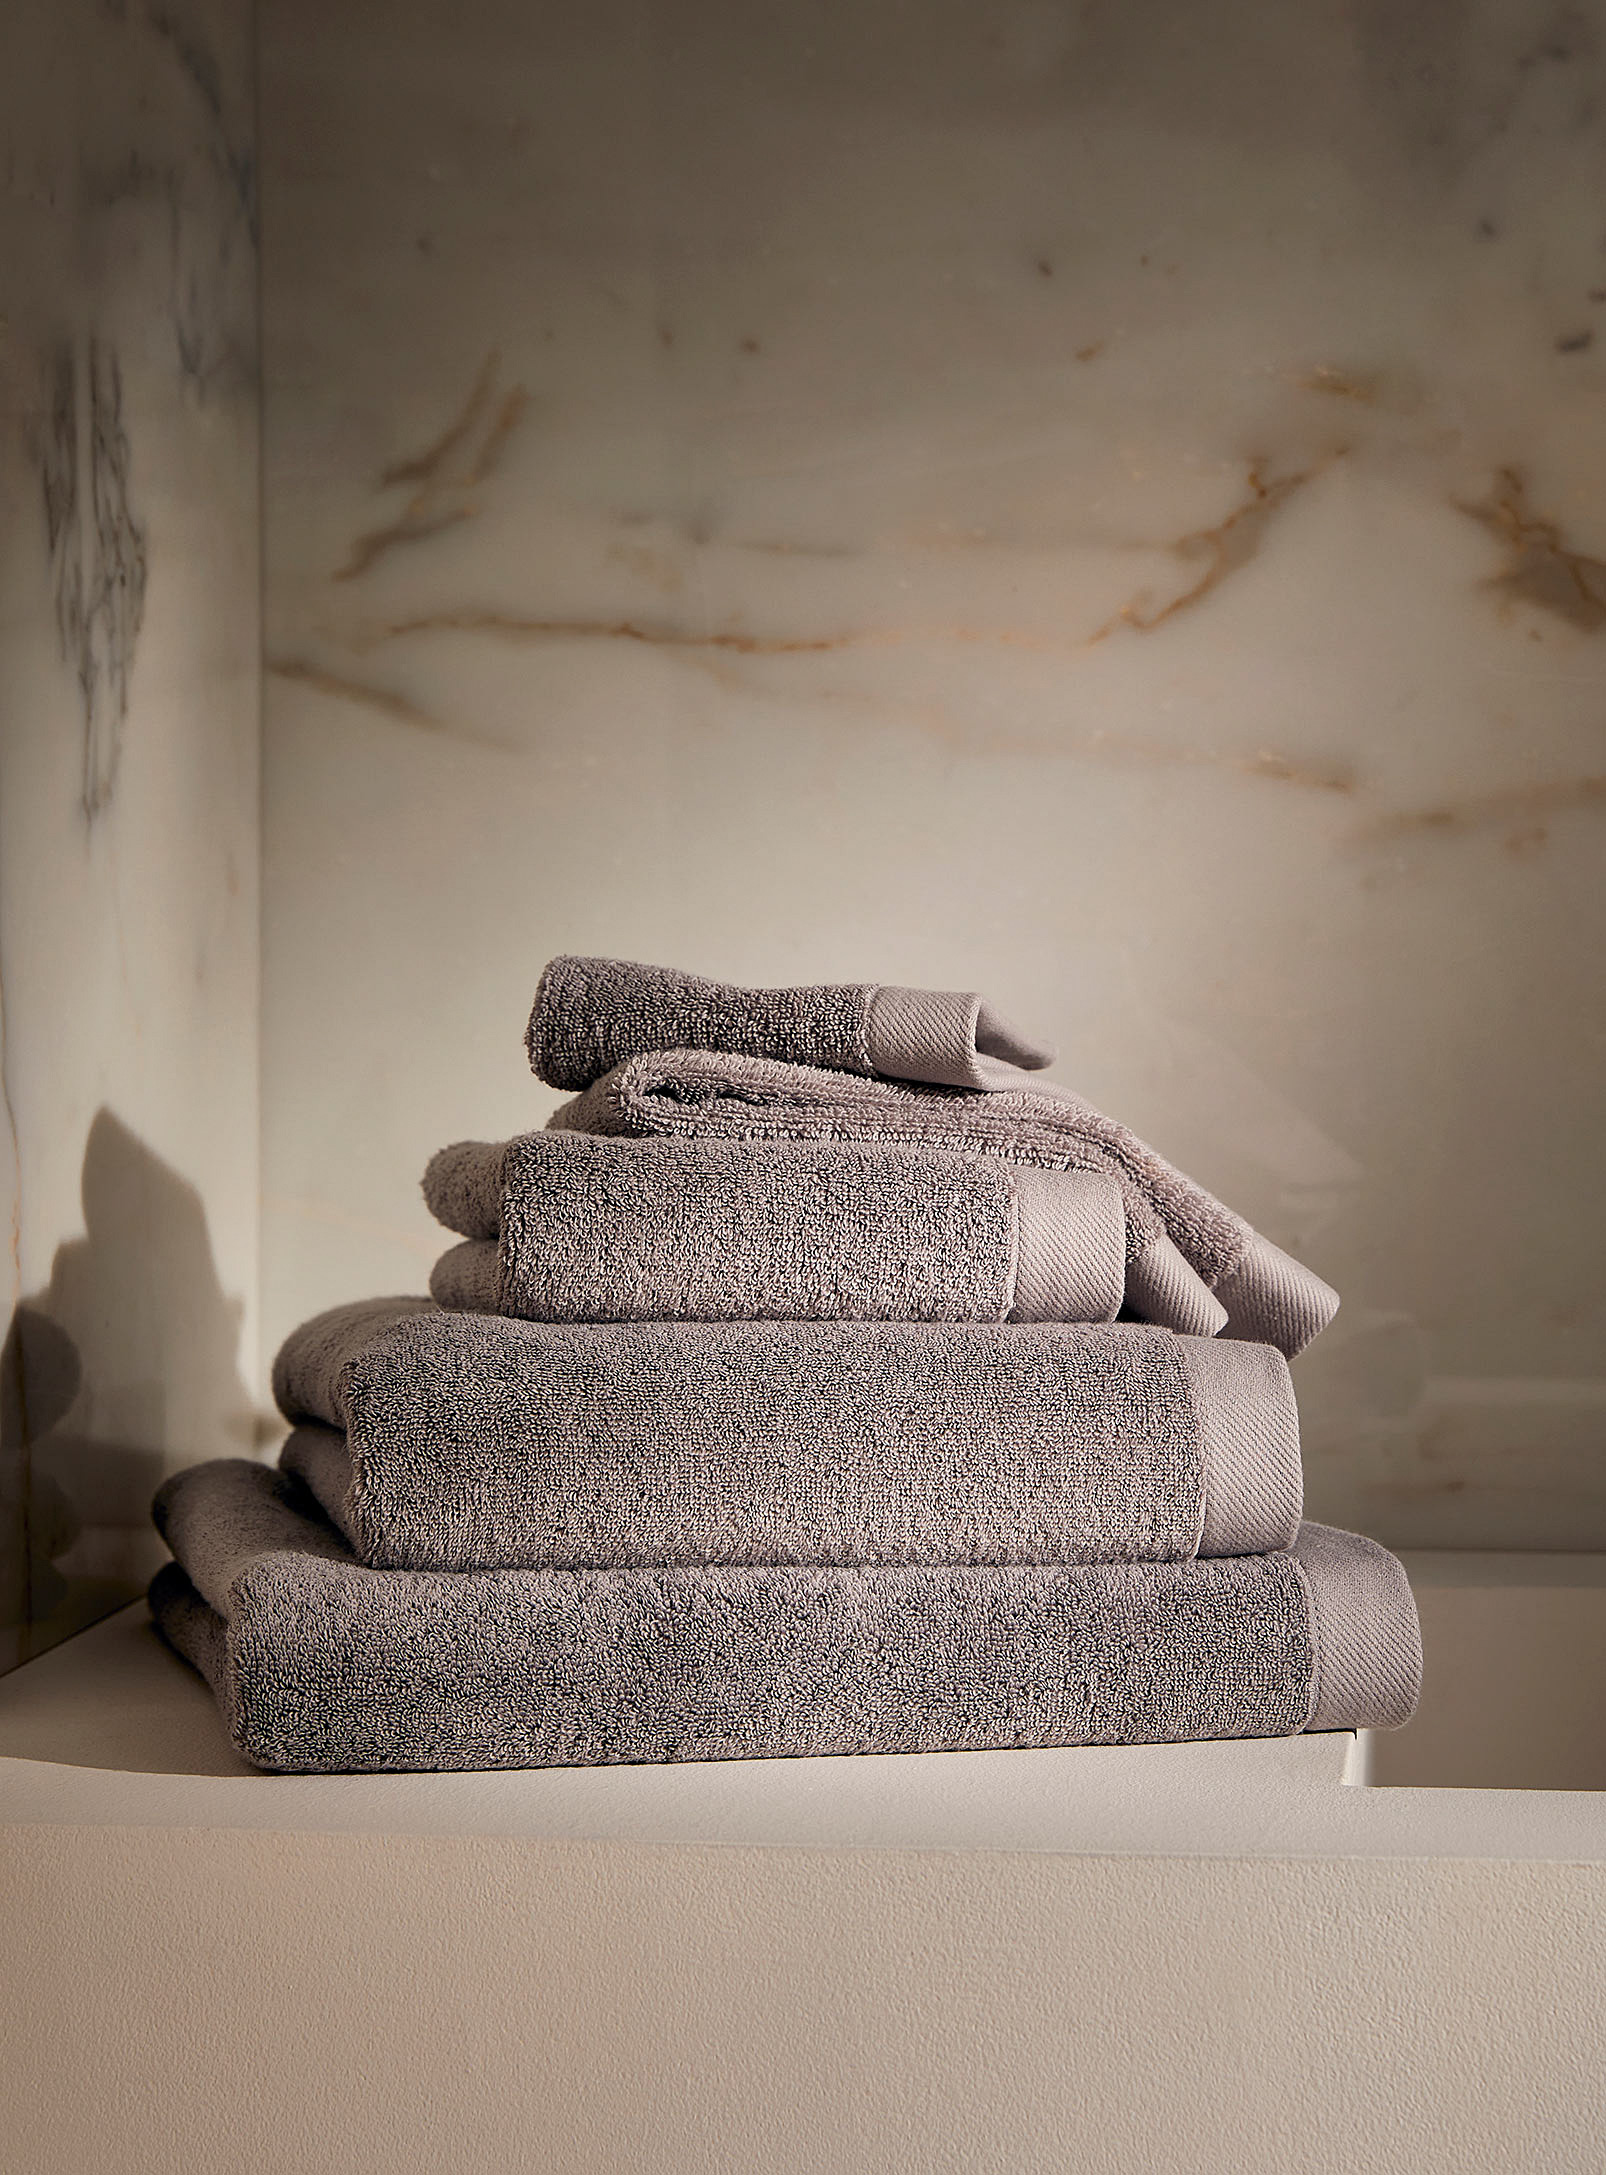 Simons Maison Céleste Zero-twist Towels Soft And Plush, Highly Absorbent In Grey